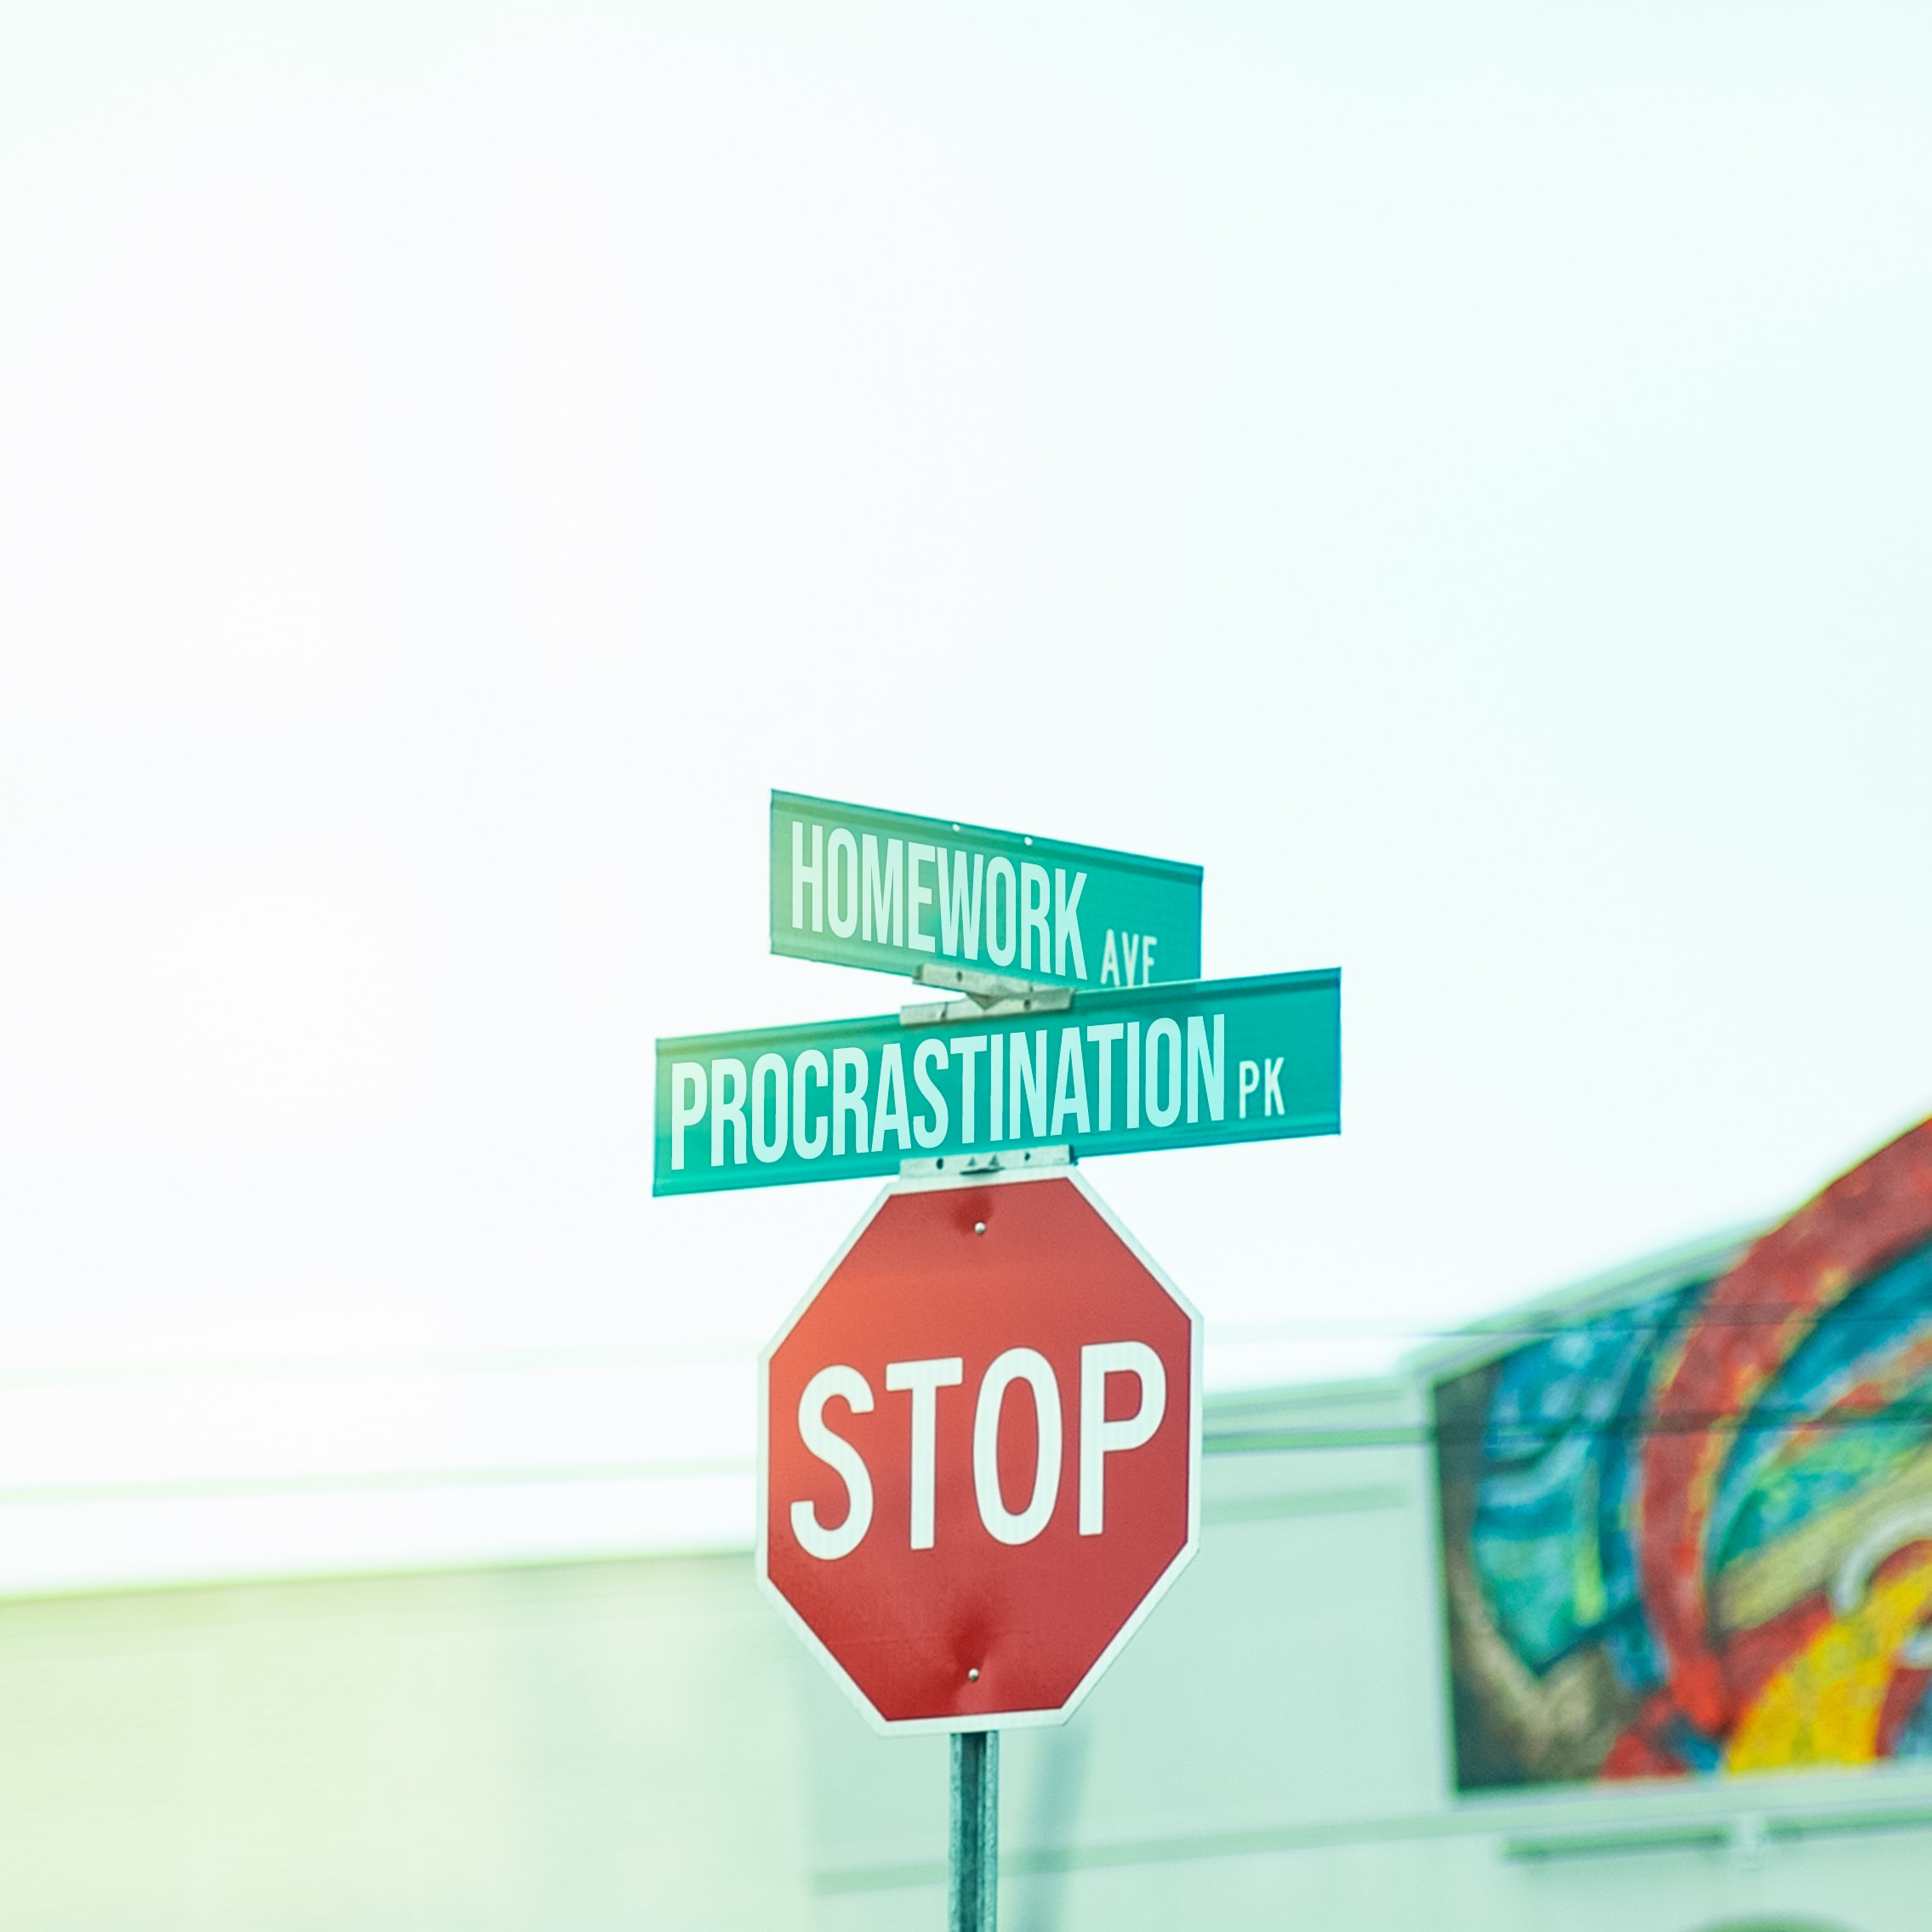 Stop sign with photoshoped street names: 'Homework Ave' and 'Procrastination Pk'.